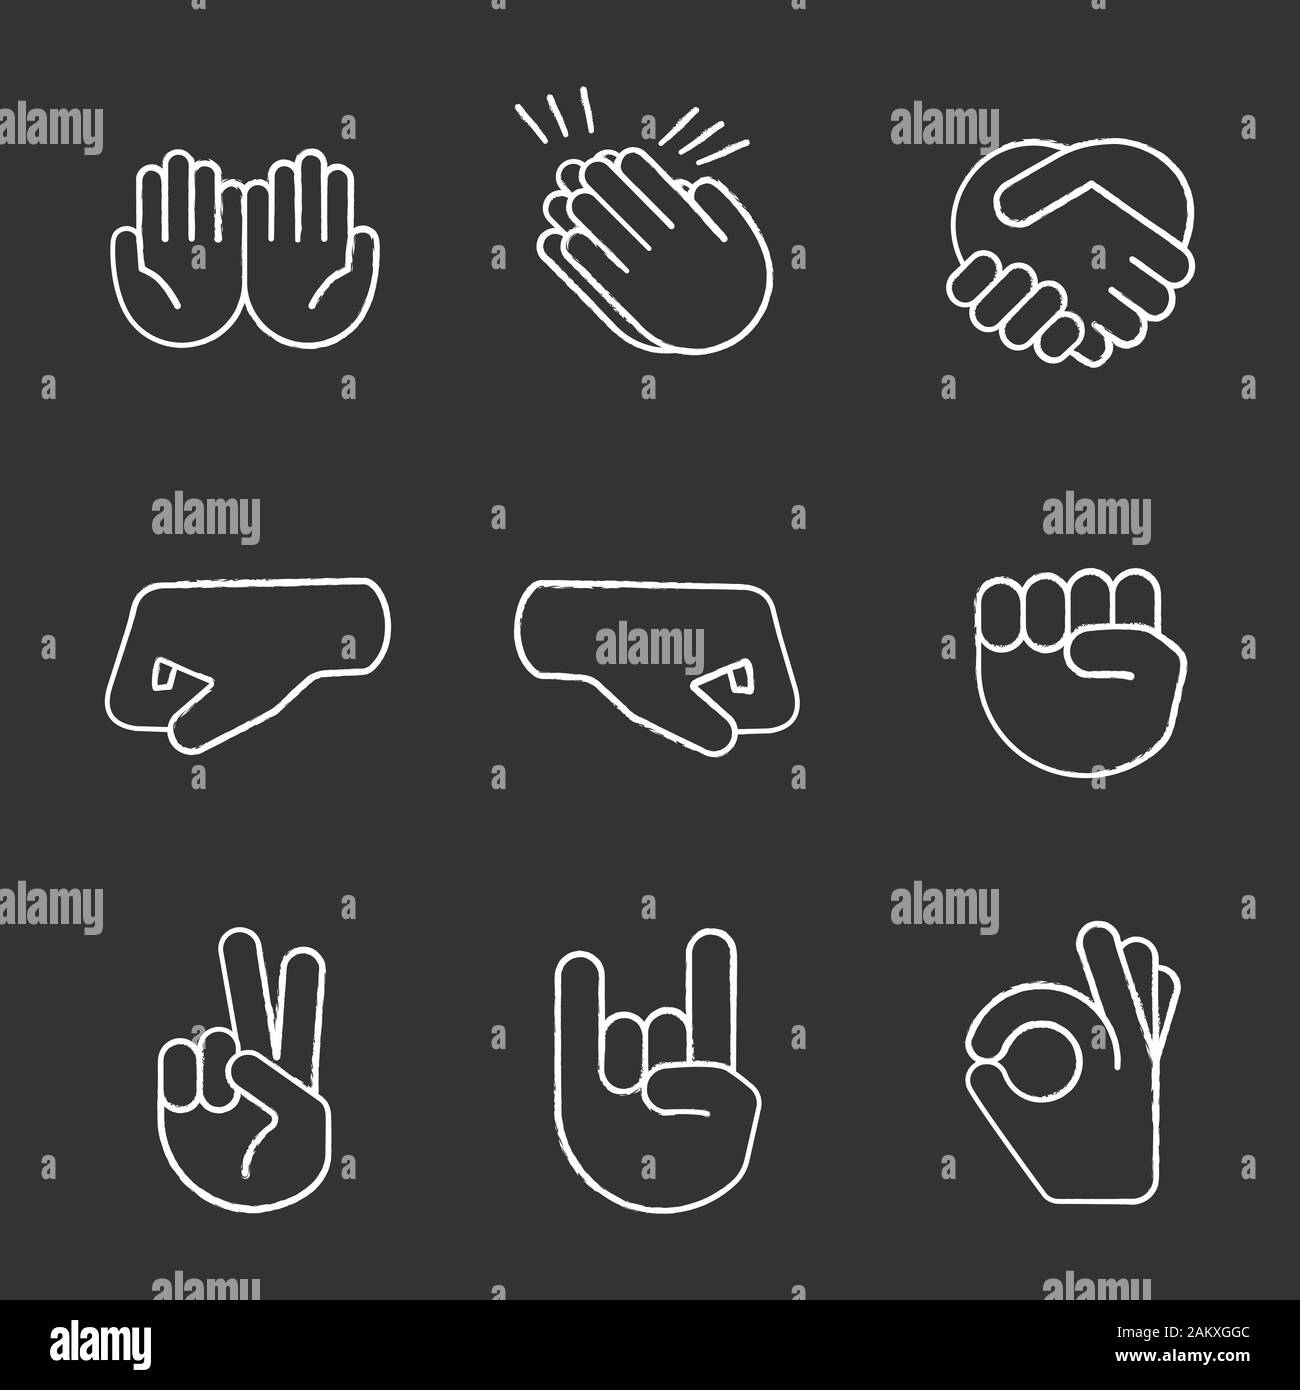 Hand Gesture Emojis Icons Collection Handshake Biceps Applause Thumb Peace  Rock On Ok Folder Hands Gesturing Set Of Different Emoticon Hands Isolated  On Transparent Background Illustration Stock Illustration - Download Image  Now 